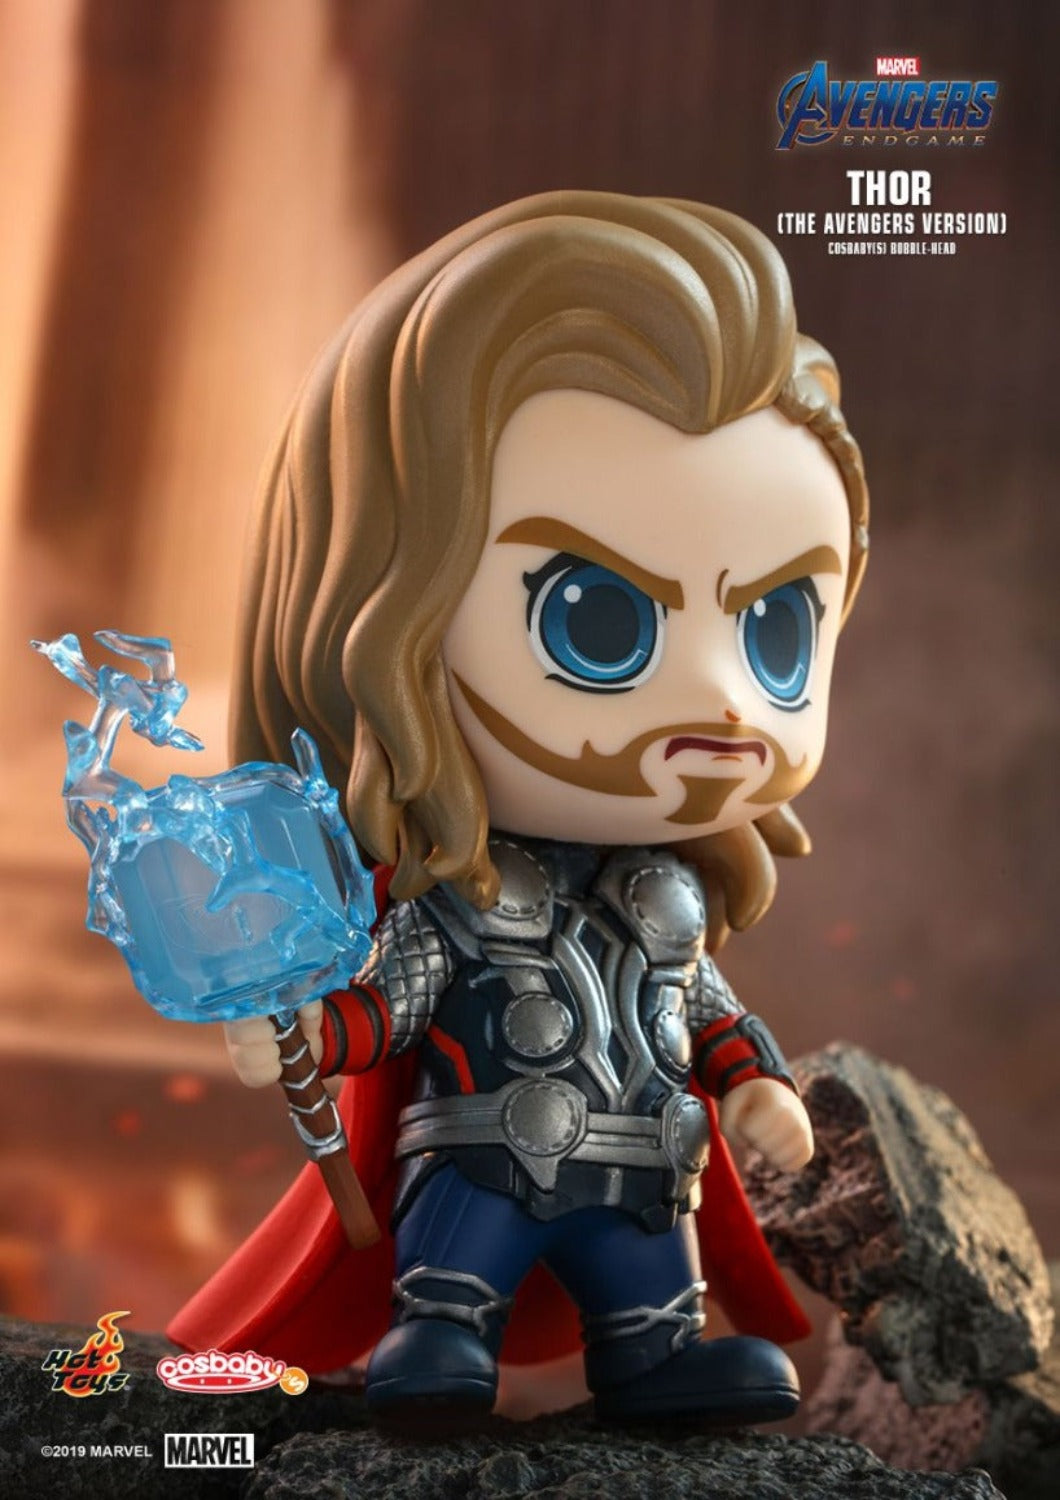 THOR THE AVENGERS VERSION